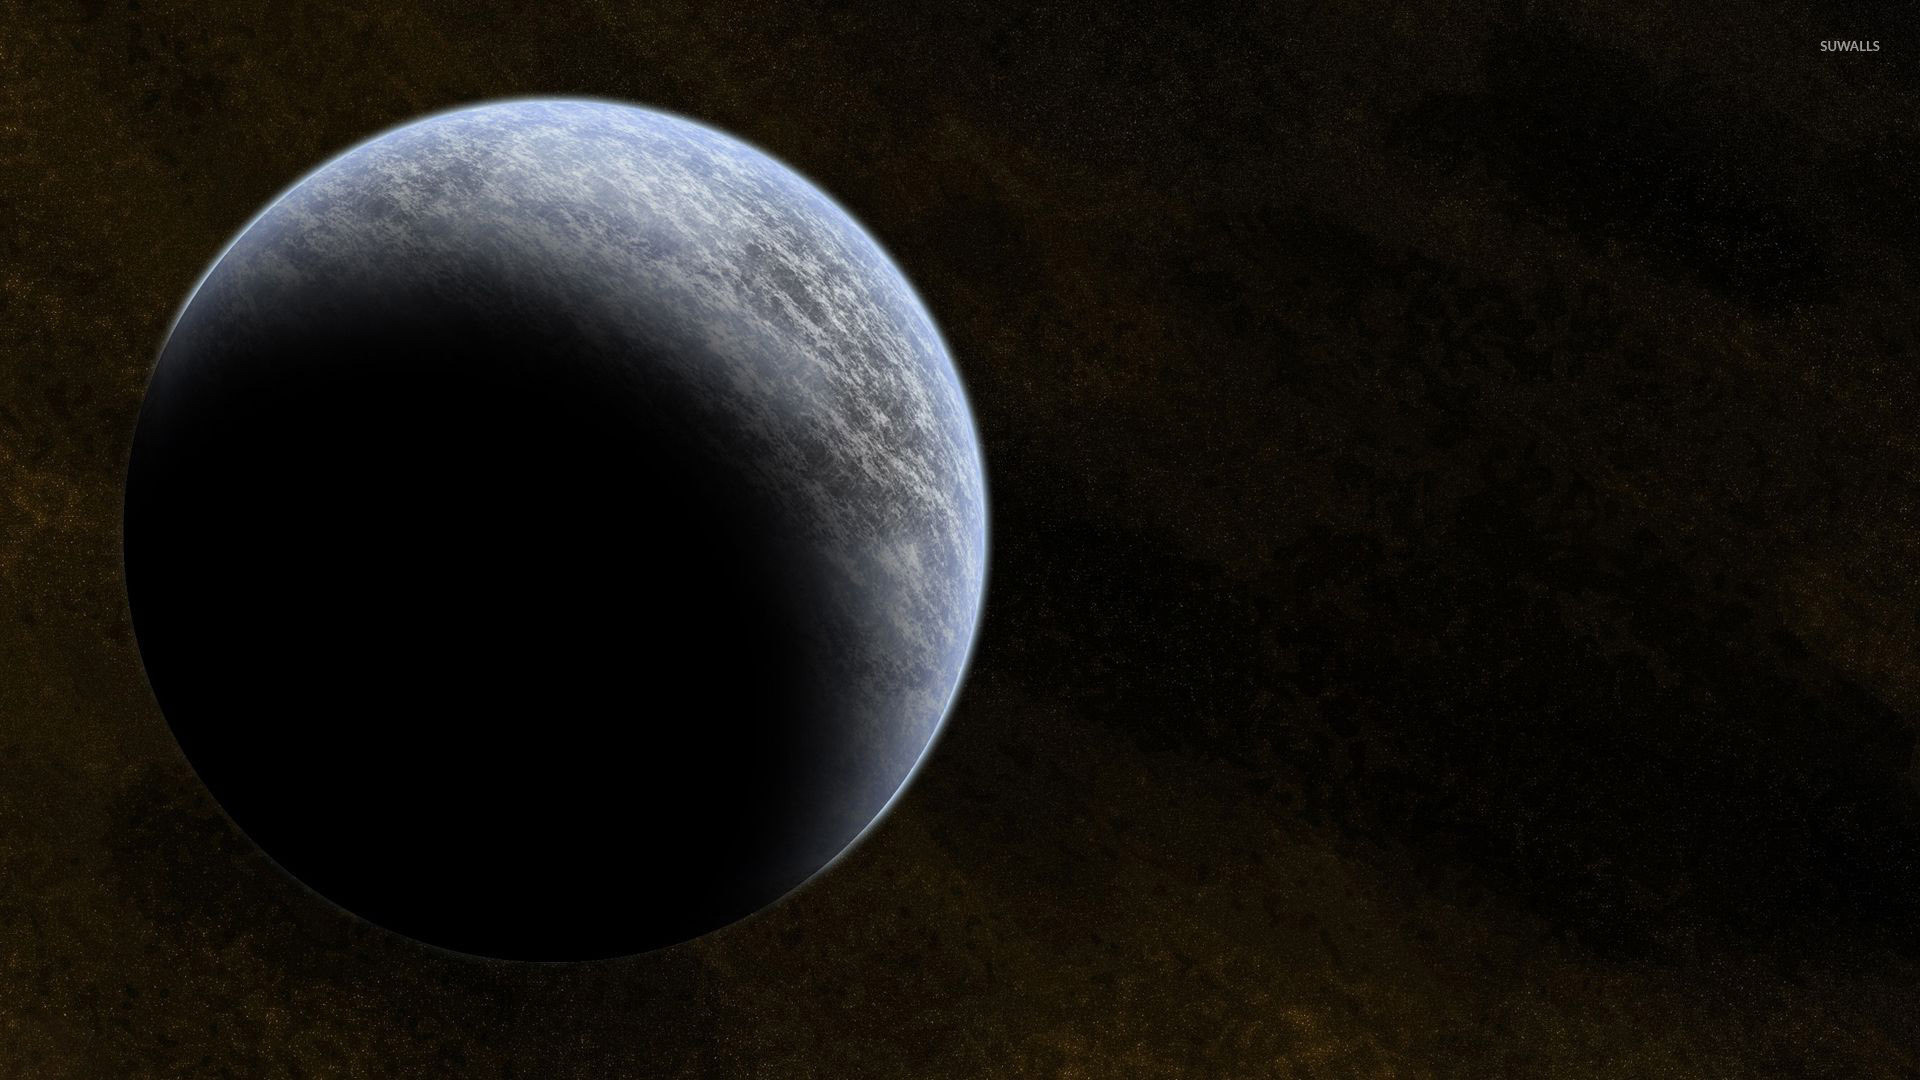 Gray planet in the brown universe wallpaper